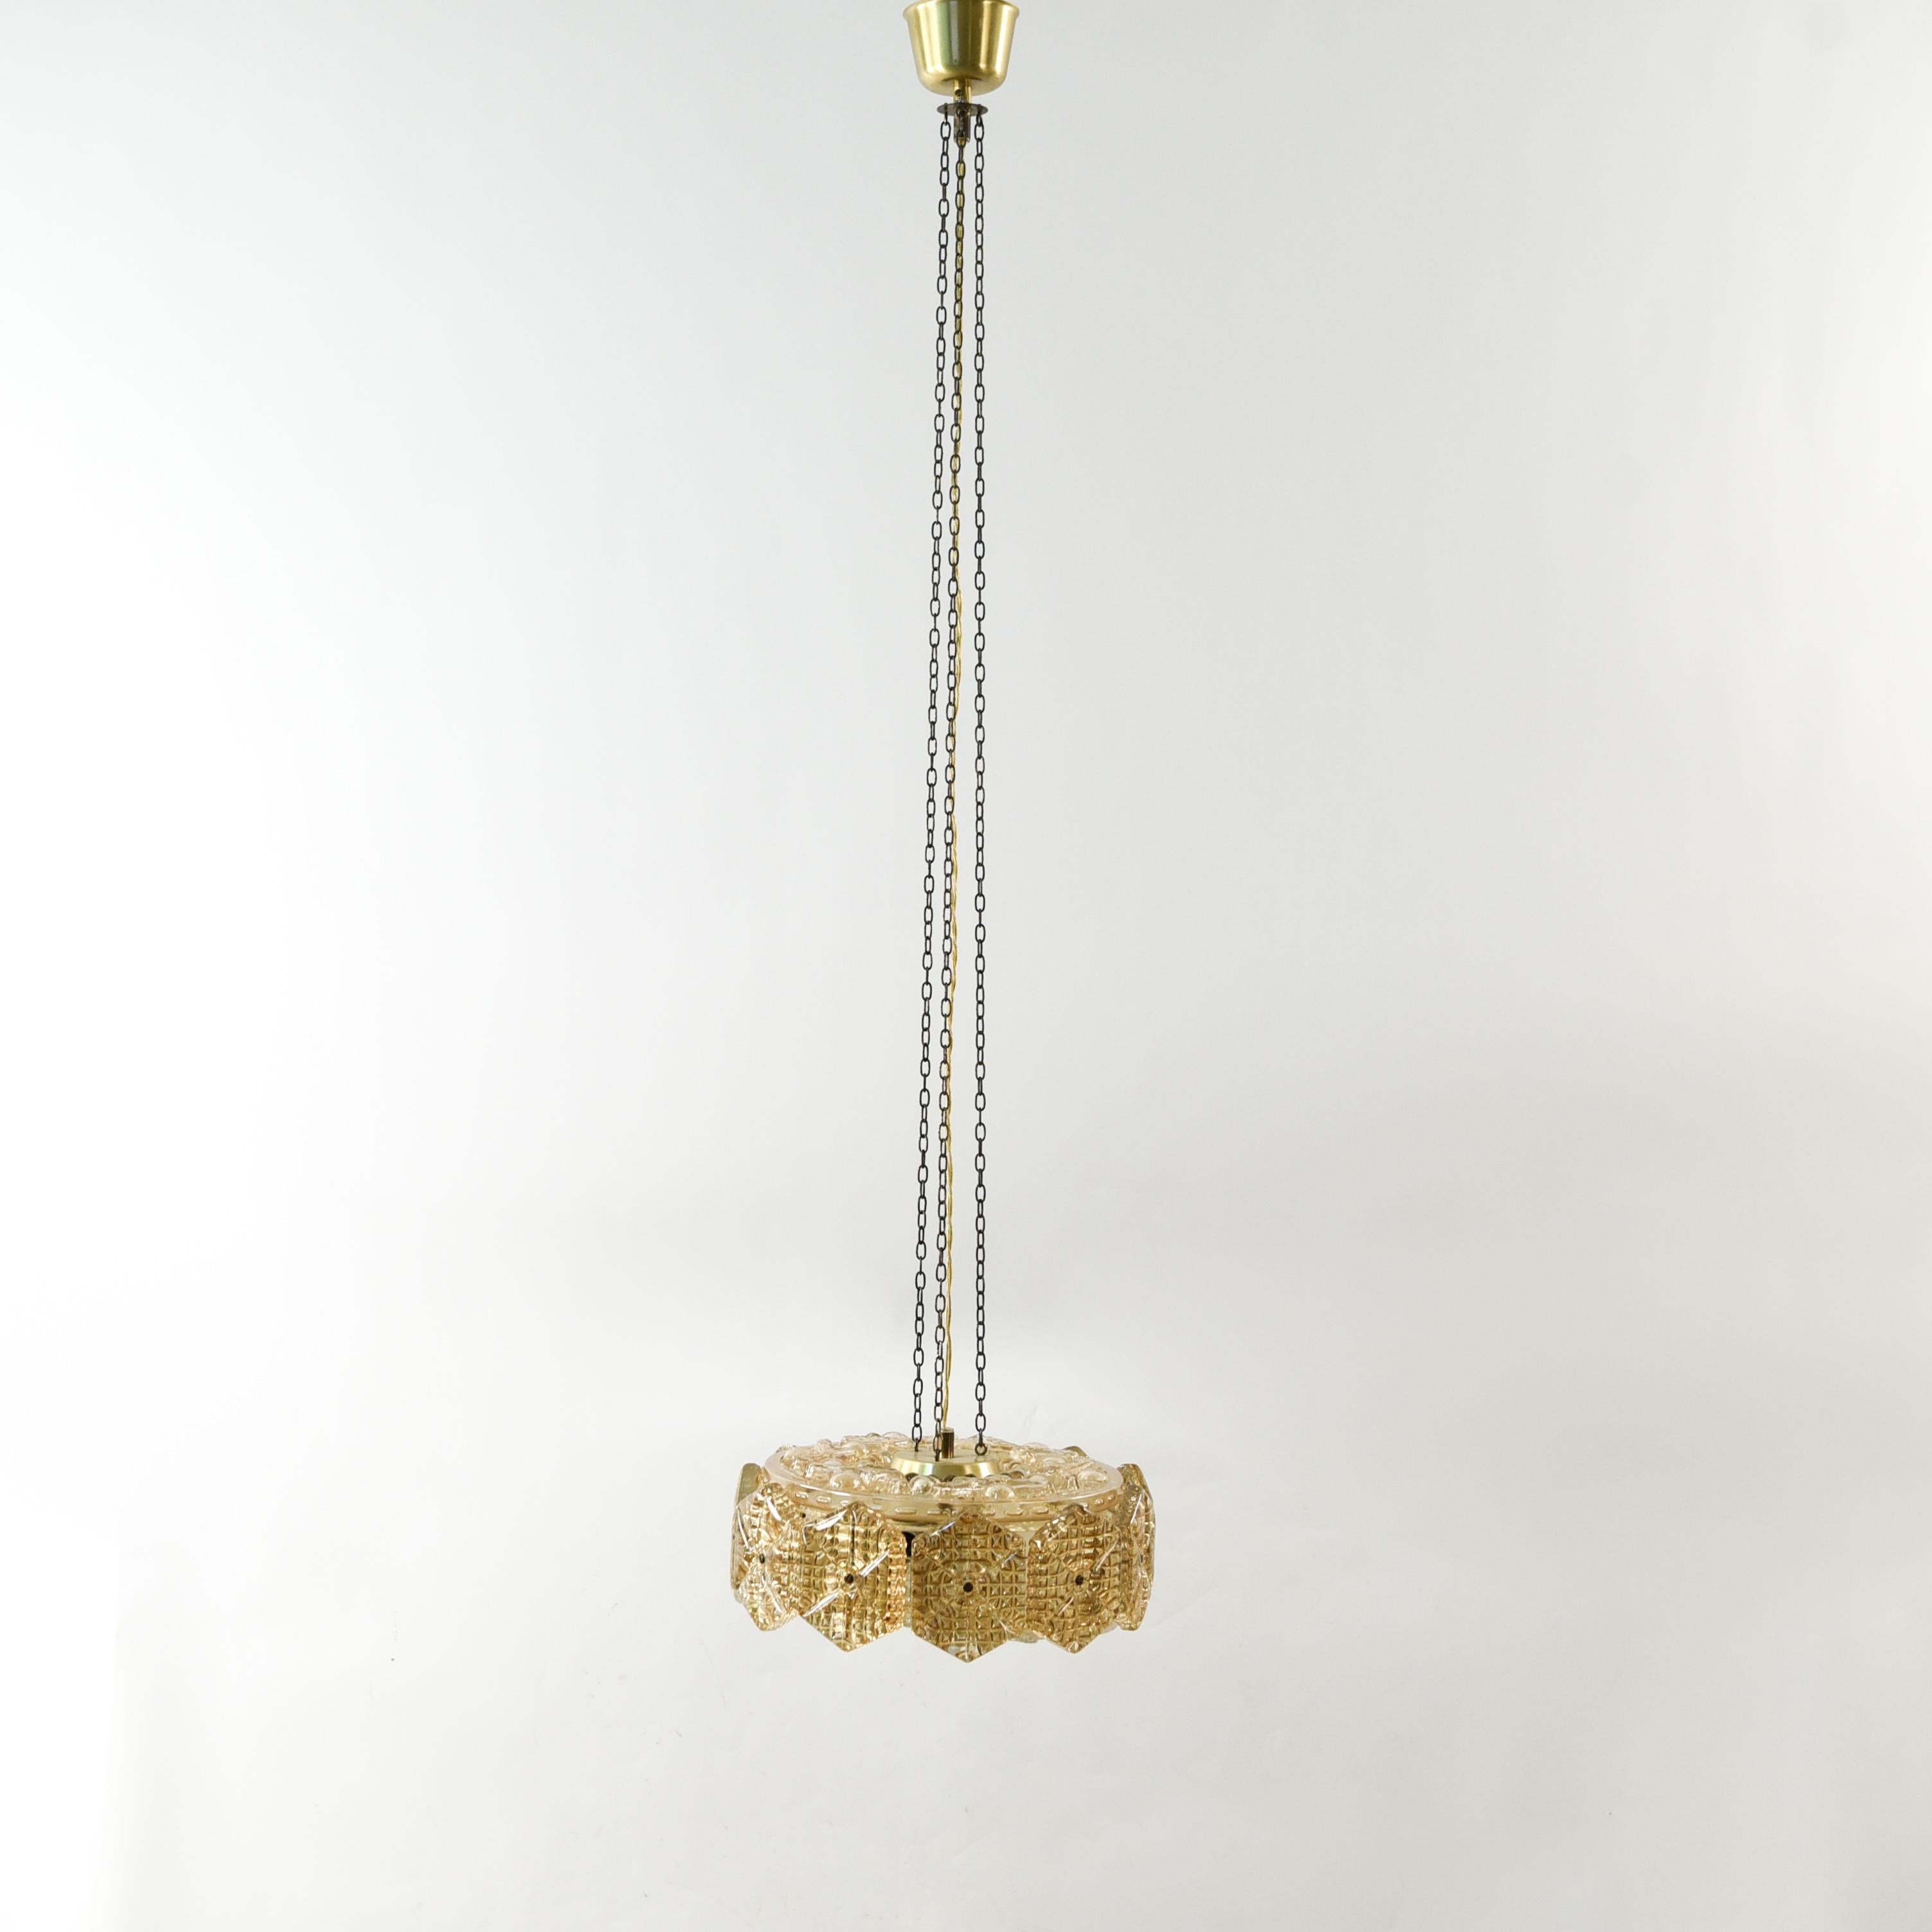 Swedish Crystal and Brass Pendant Chandelier by Carl Fagerlund for Orrefors, 1960s